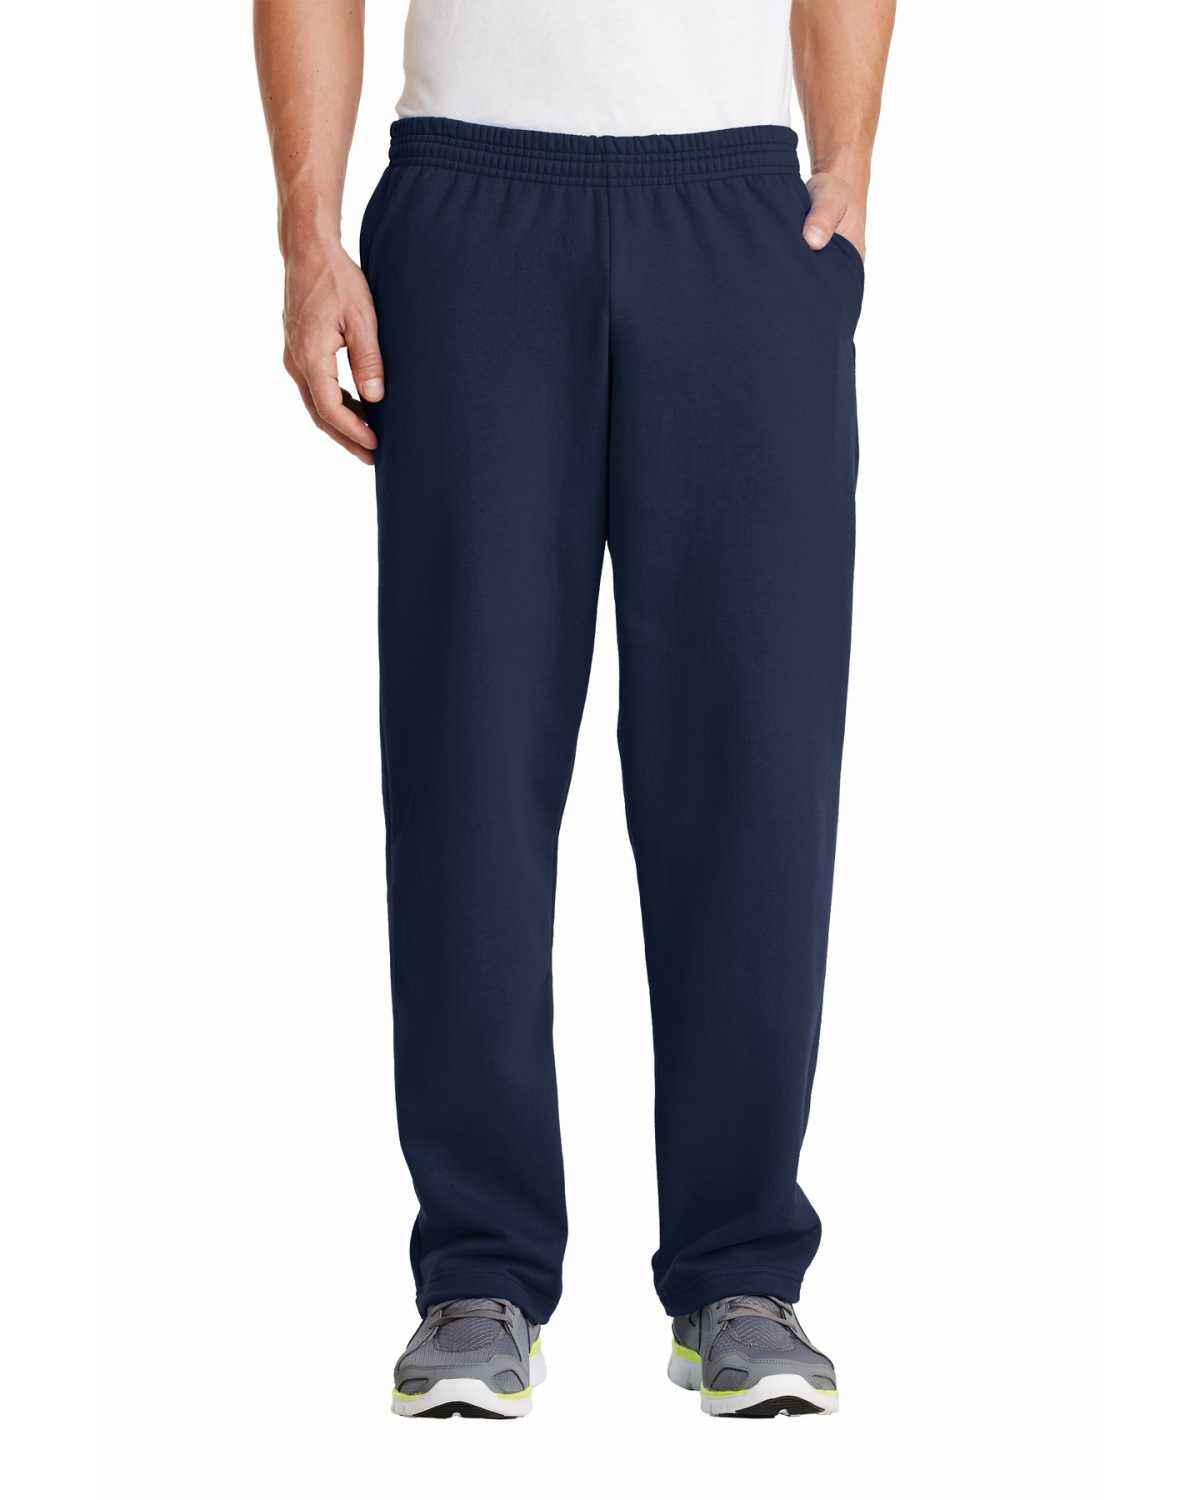 Port & Company PC78P Core Fleece Sweatpant with Pockets on discount ...